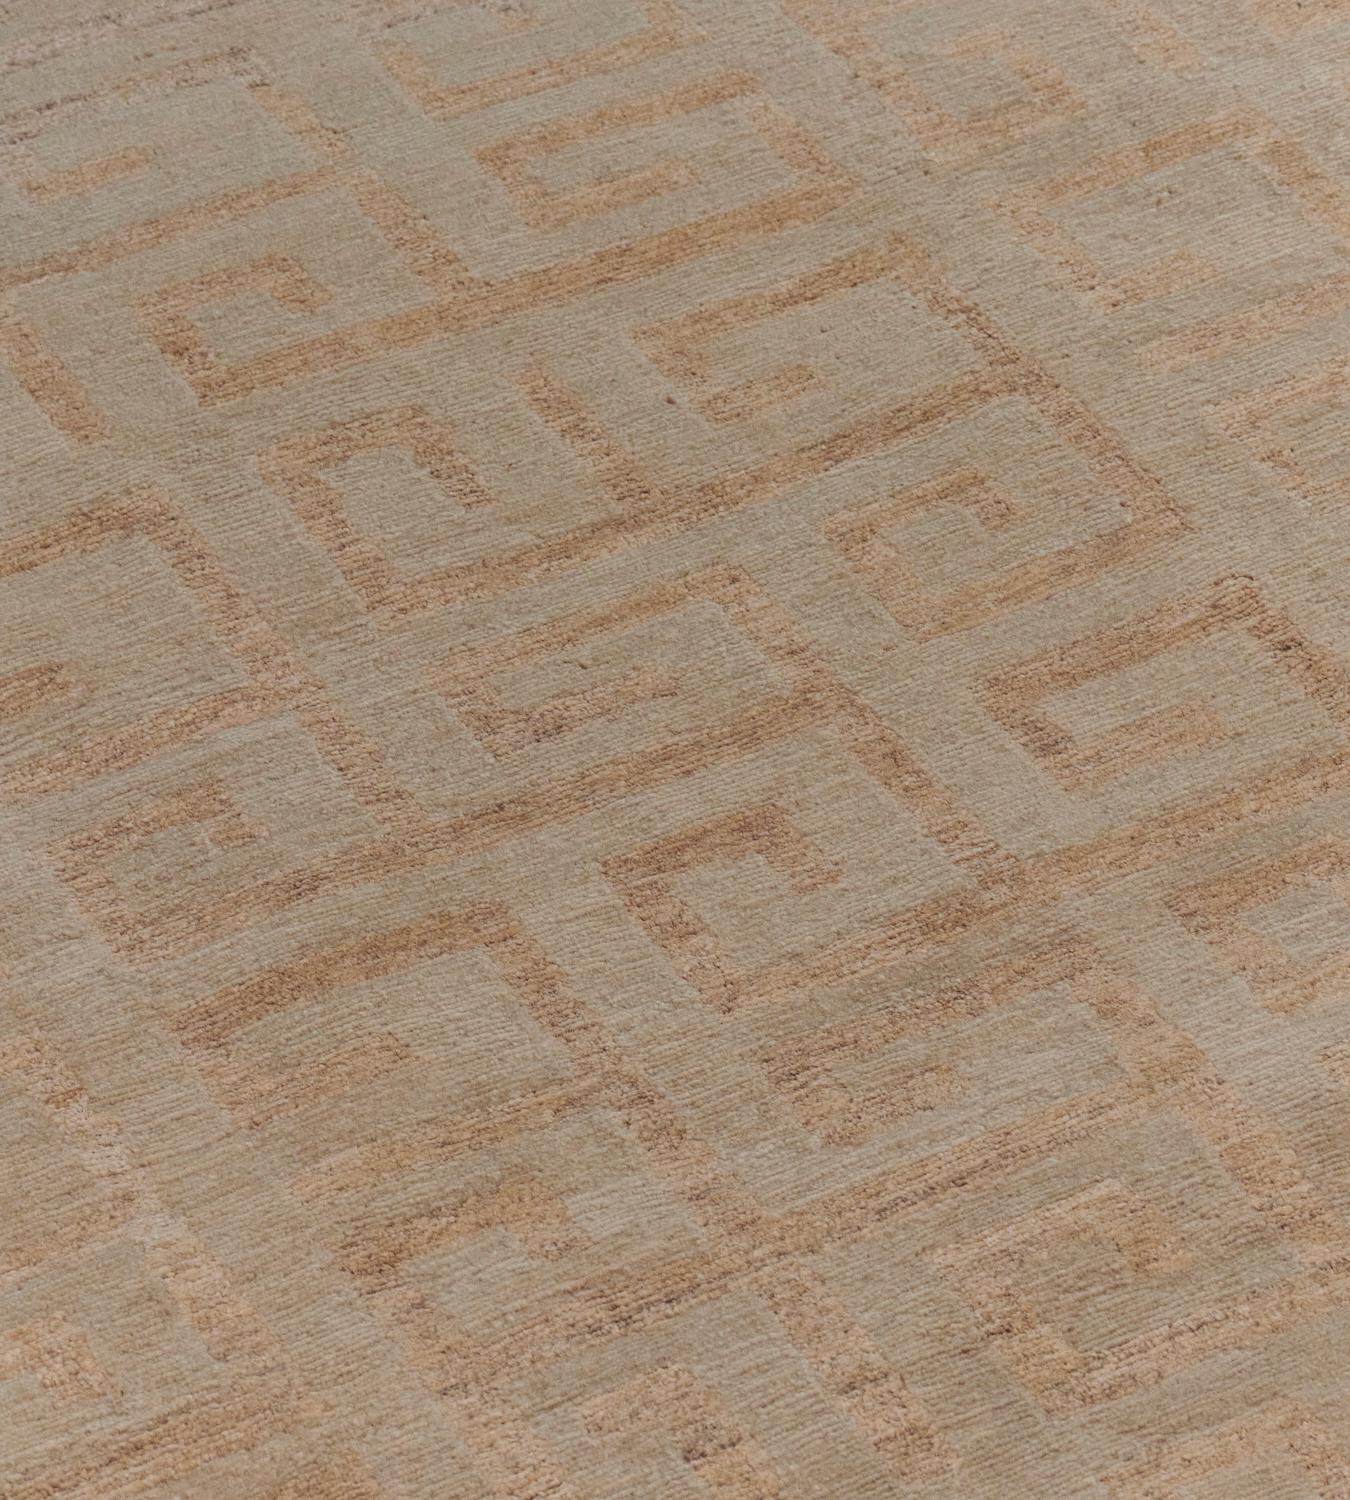 Part of the Mansour Modern collection, this rug features a Greek Key design and is handwoven by master weavers using the finest quality techniques and materials.